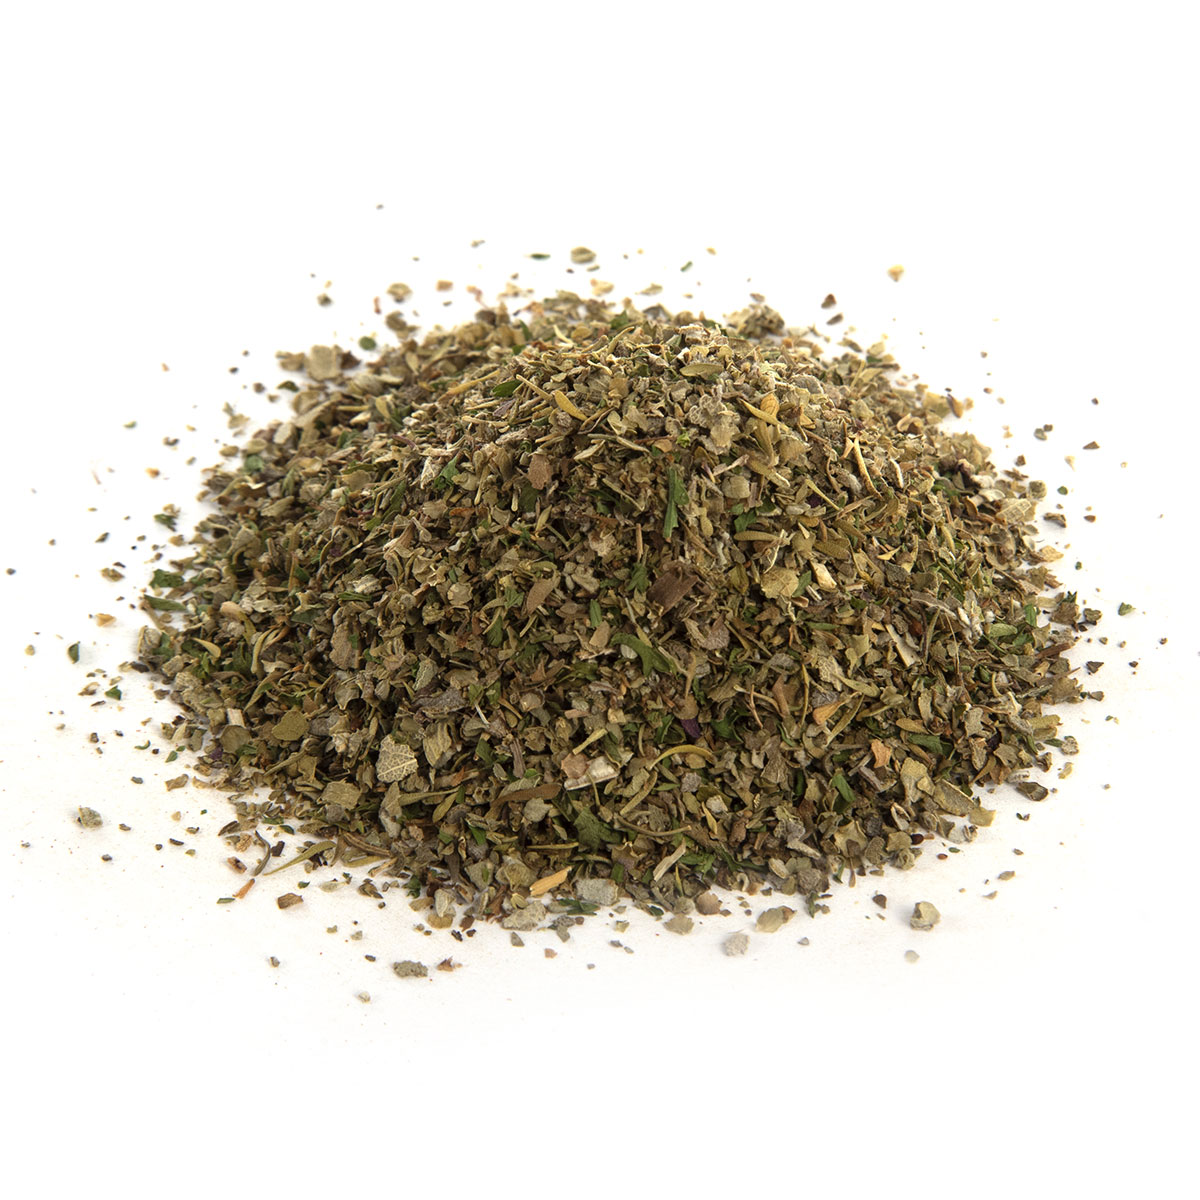 bulk herbs and spices - mixed herbs